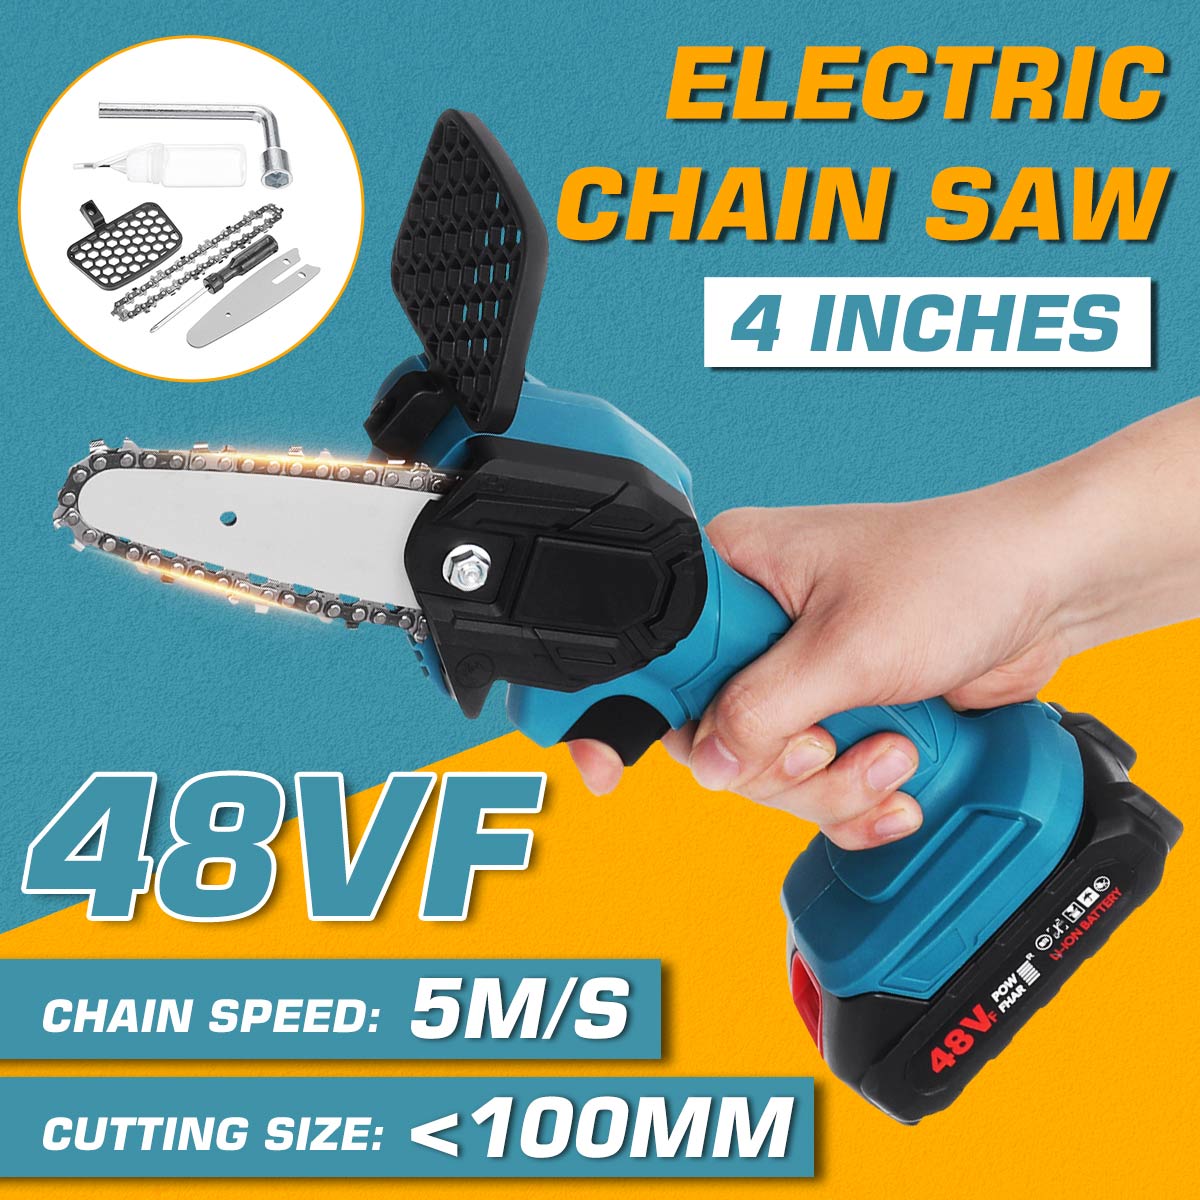 4inch-800W-48VF-Electric-Chain-Saw-Portable-Handheld-Wood-Cutter-Woodworking-Cutting-Tool-W-None1pc2-1827616-2